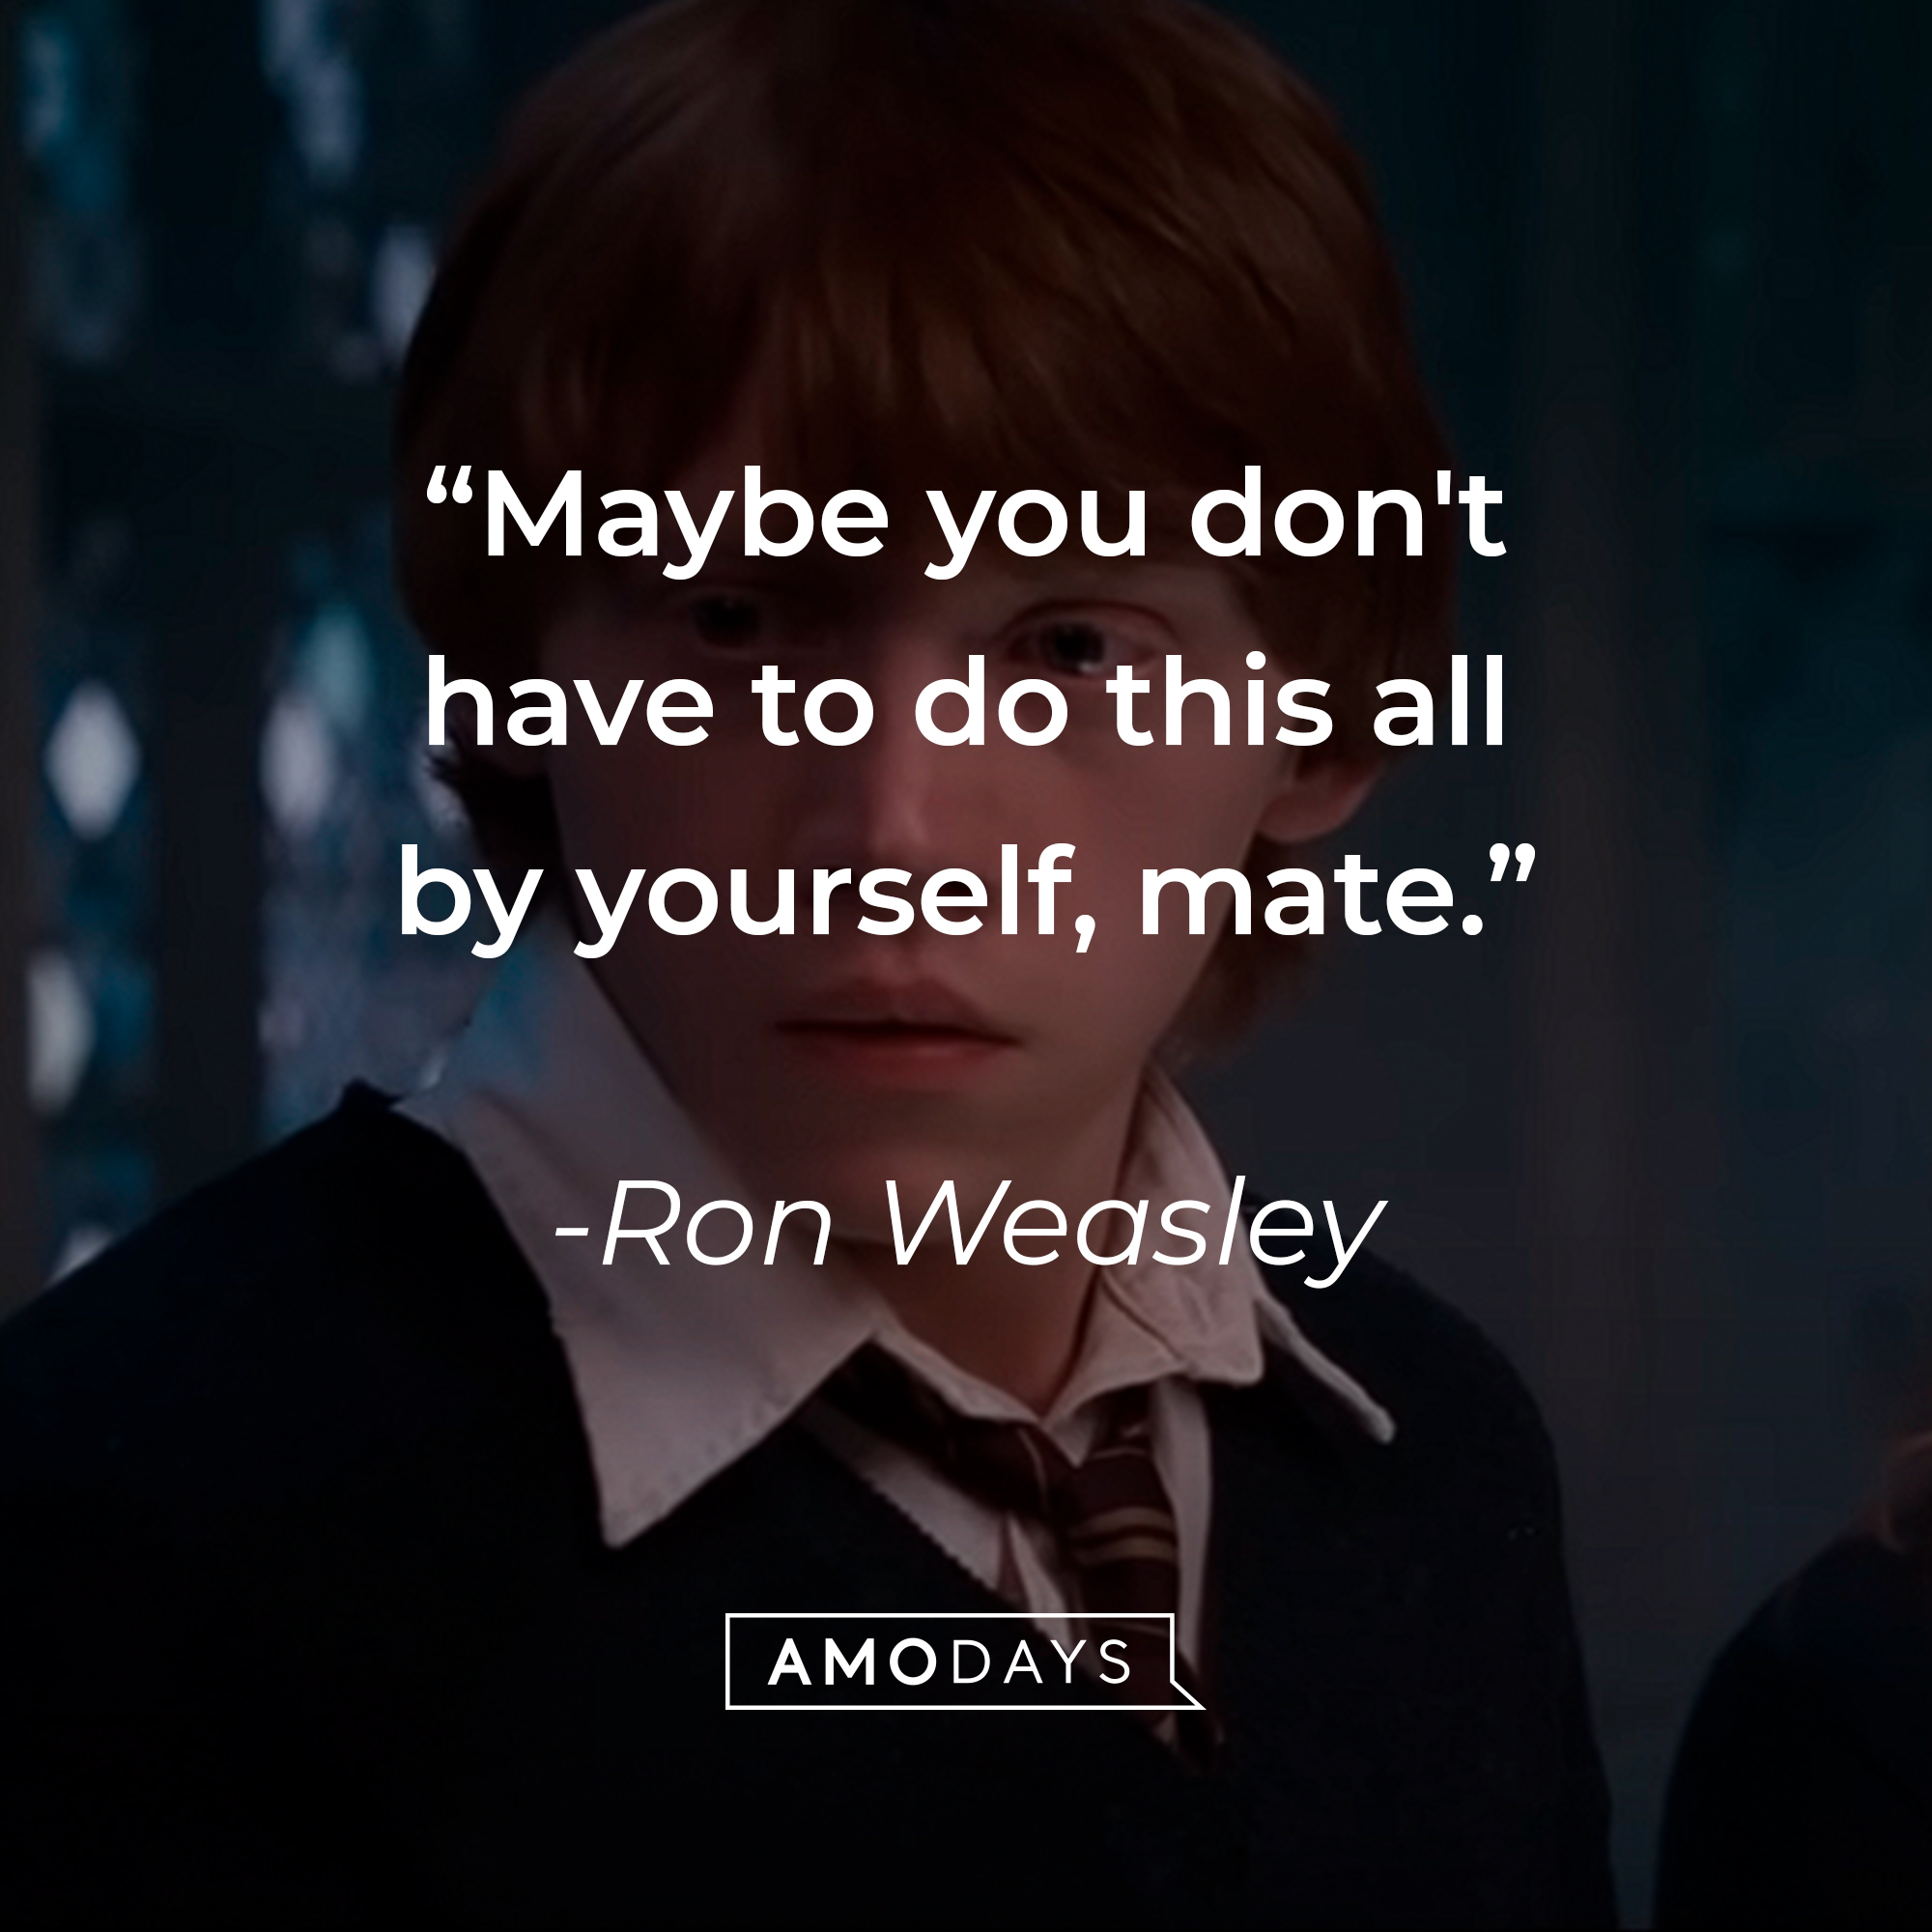 Ron Weasley's quote: “Maybe you don't have to do this all by yourself, mate.” | Source: youtube.com/harrypotter